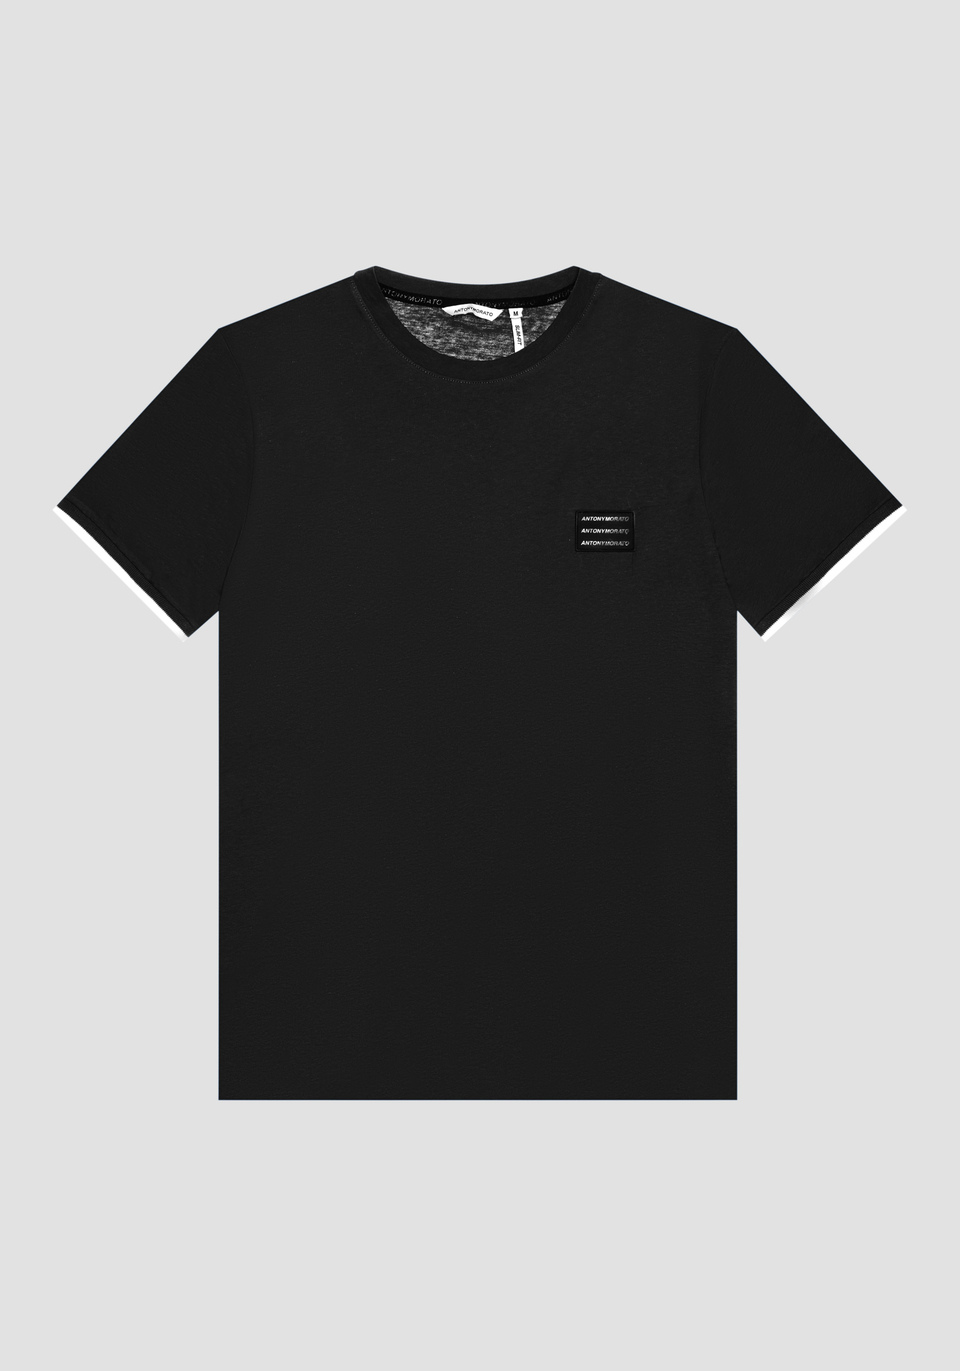 SLIM FIT T-SHIRT IN PURE COTTON WITH LOGO PATCH - Antony Morato Online Shop